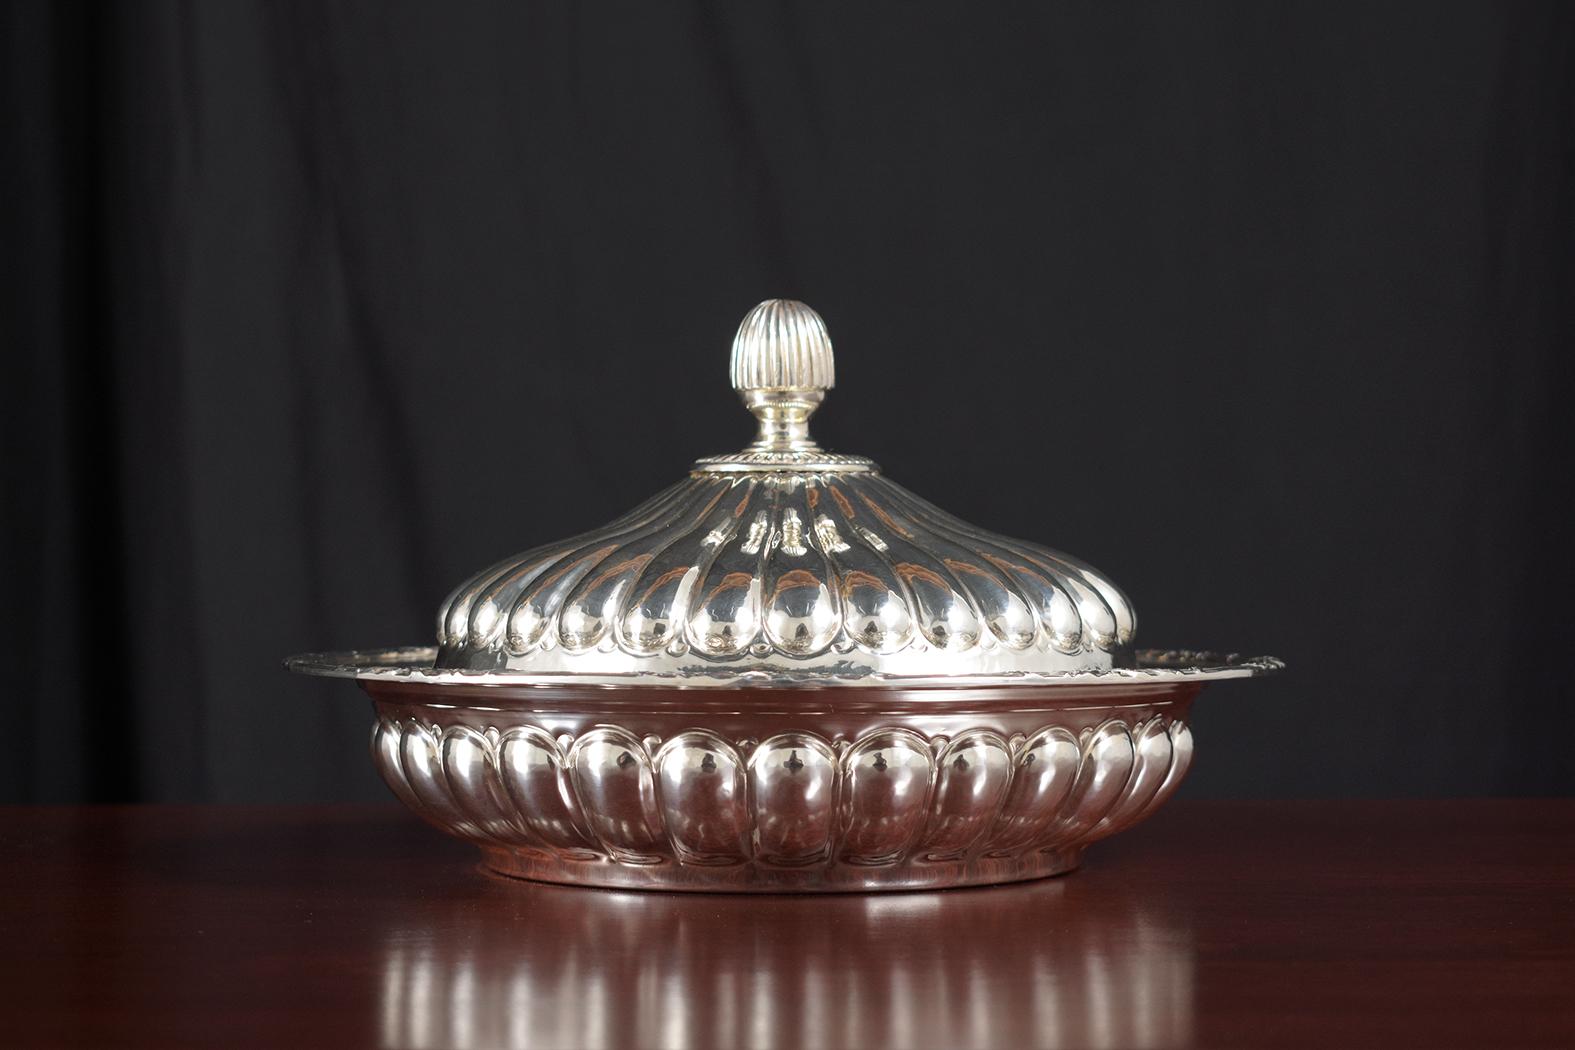 Discover our extraordinary French Art Deco centerpiece, intricately handcrafted from 925 stamped sterling silver. In great condition, this two-piece set boasts stunning gold-plated detailing inside, contributing to its sophisticated design. Expertly